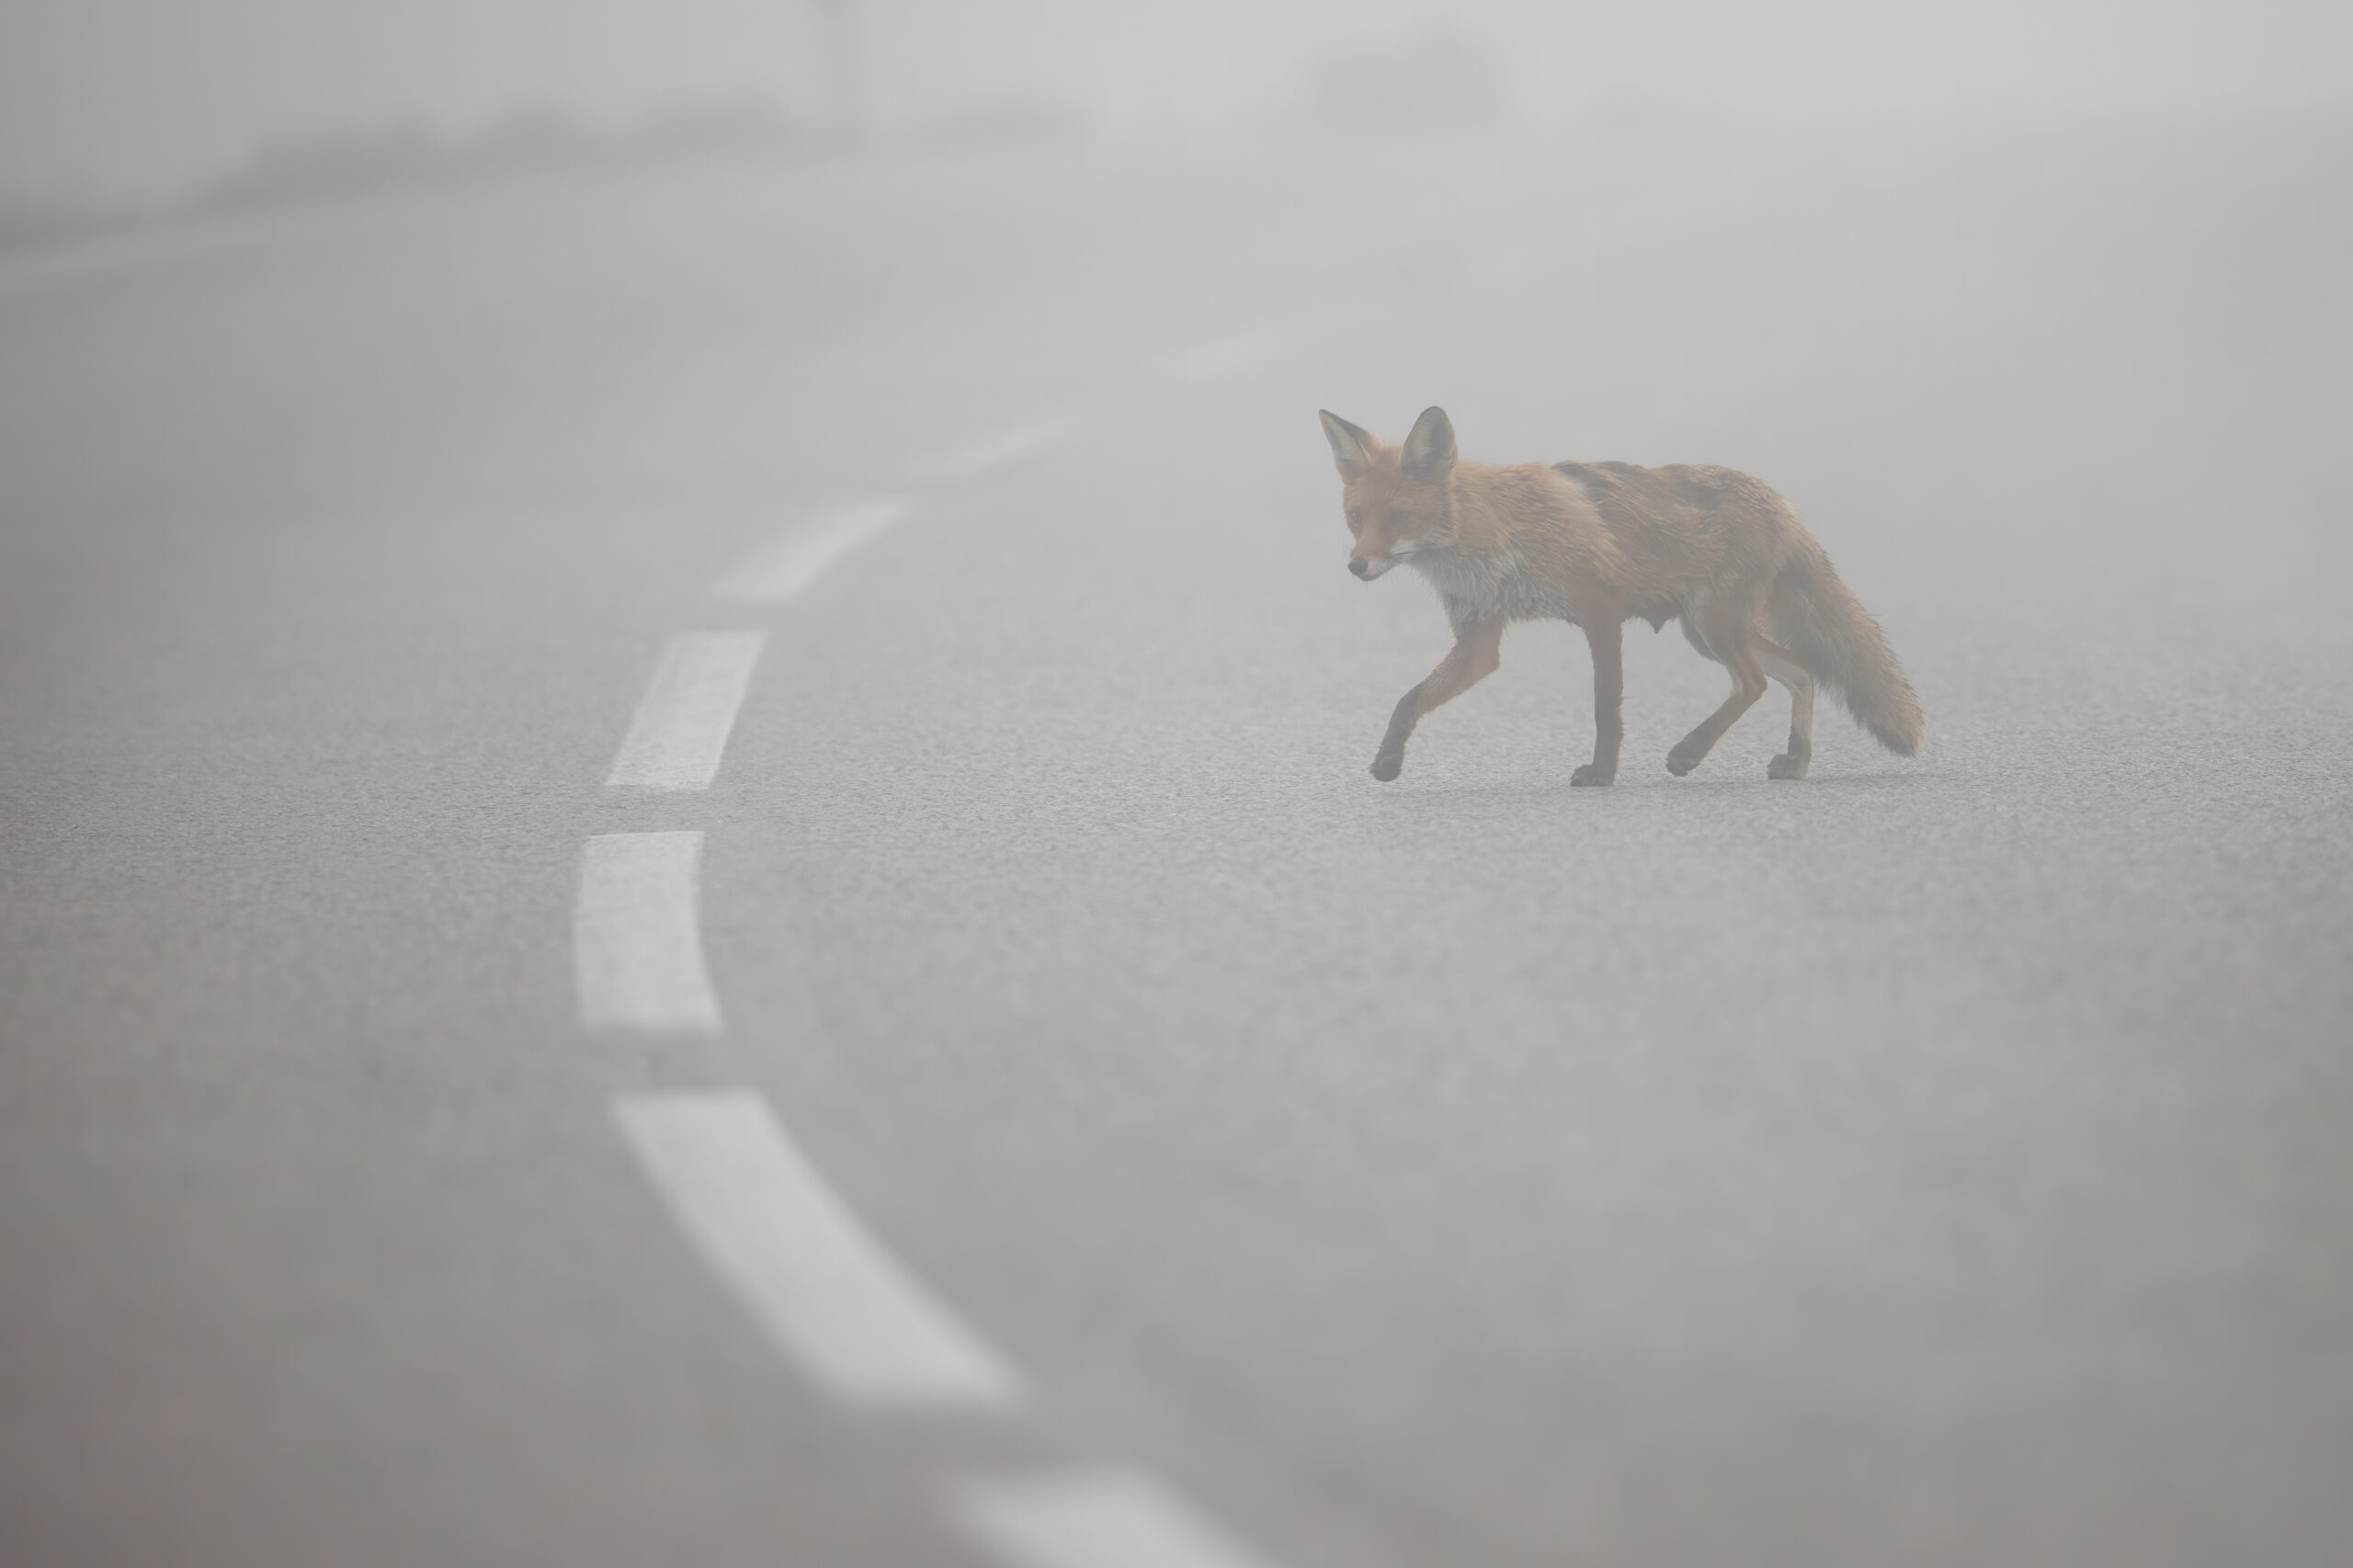 red-fox-crossing-asphalt-road-with-middle-line-in-YVH7PWE-scaled.jpg